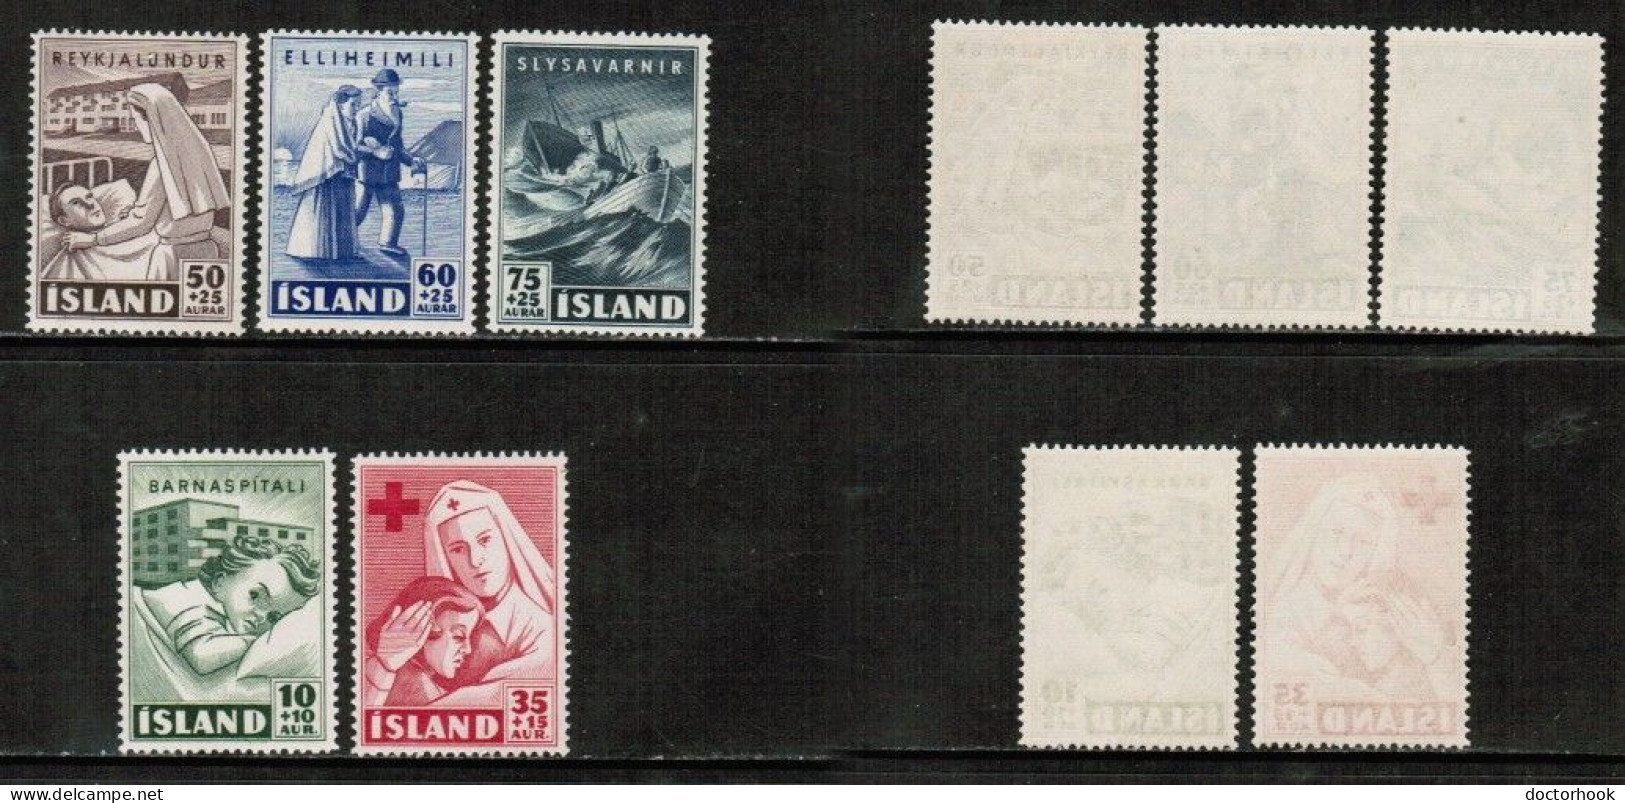 ICELAND   Scott # B 7-11* MINT LH (CONDITION AS PER SCAN) (Stamp Scan # 921-5) - Nuevos